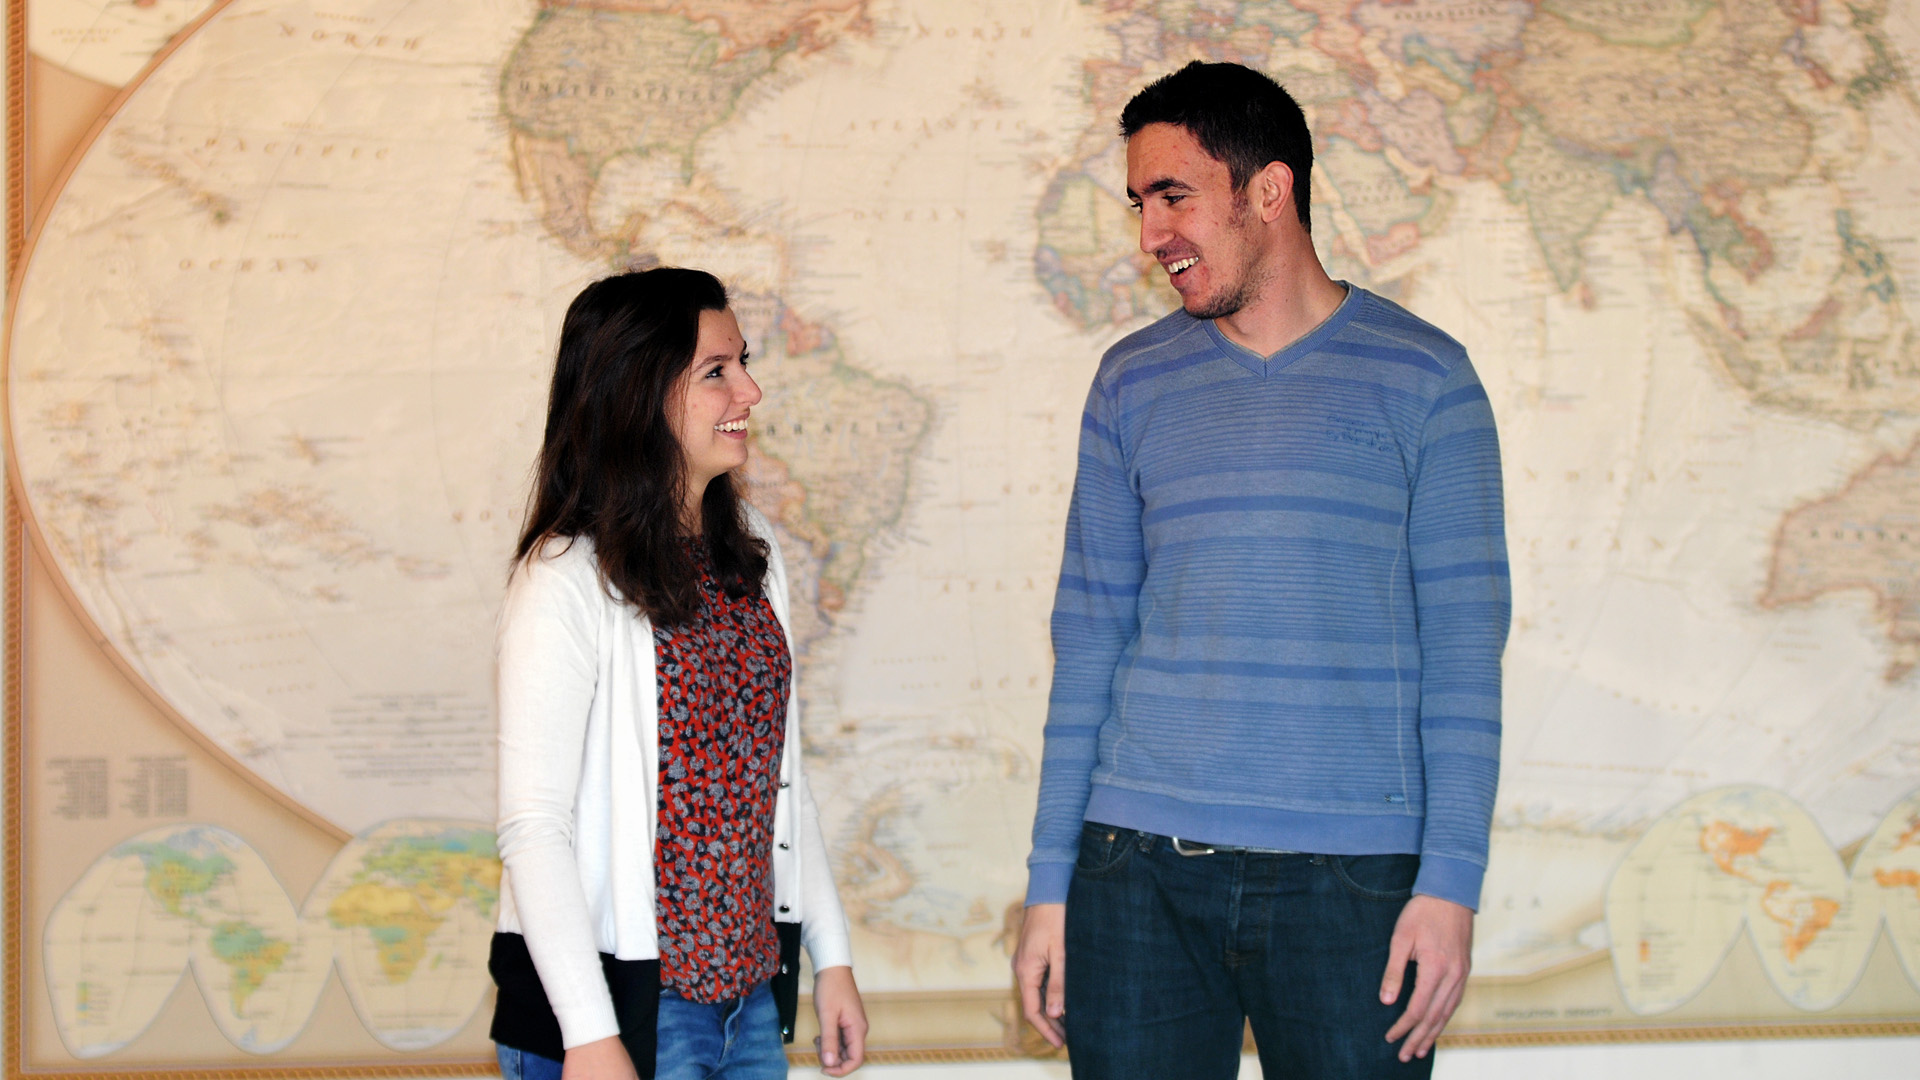 Rania and Moe stand in front of a world map and smile at each other